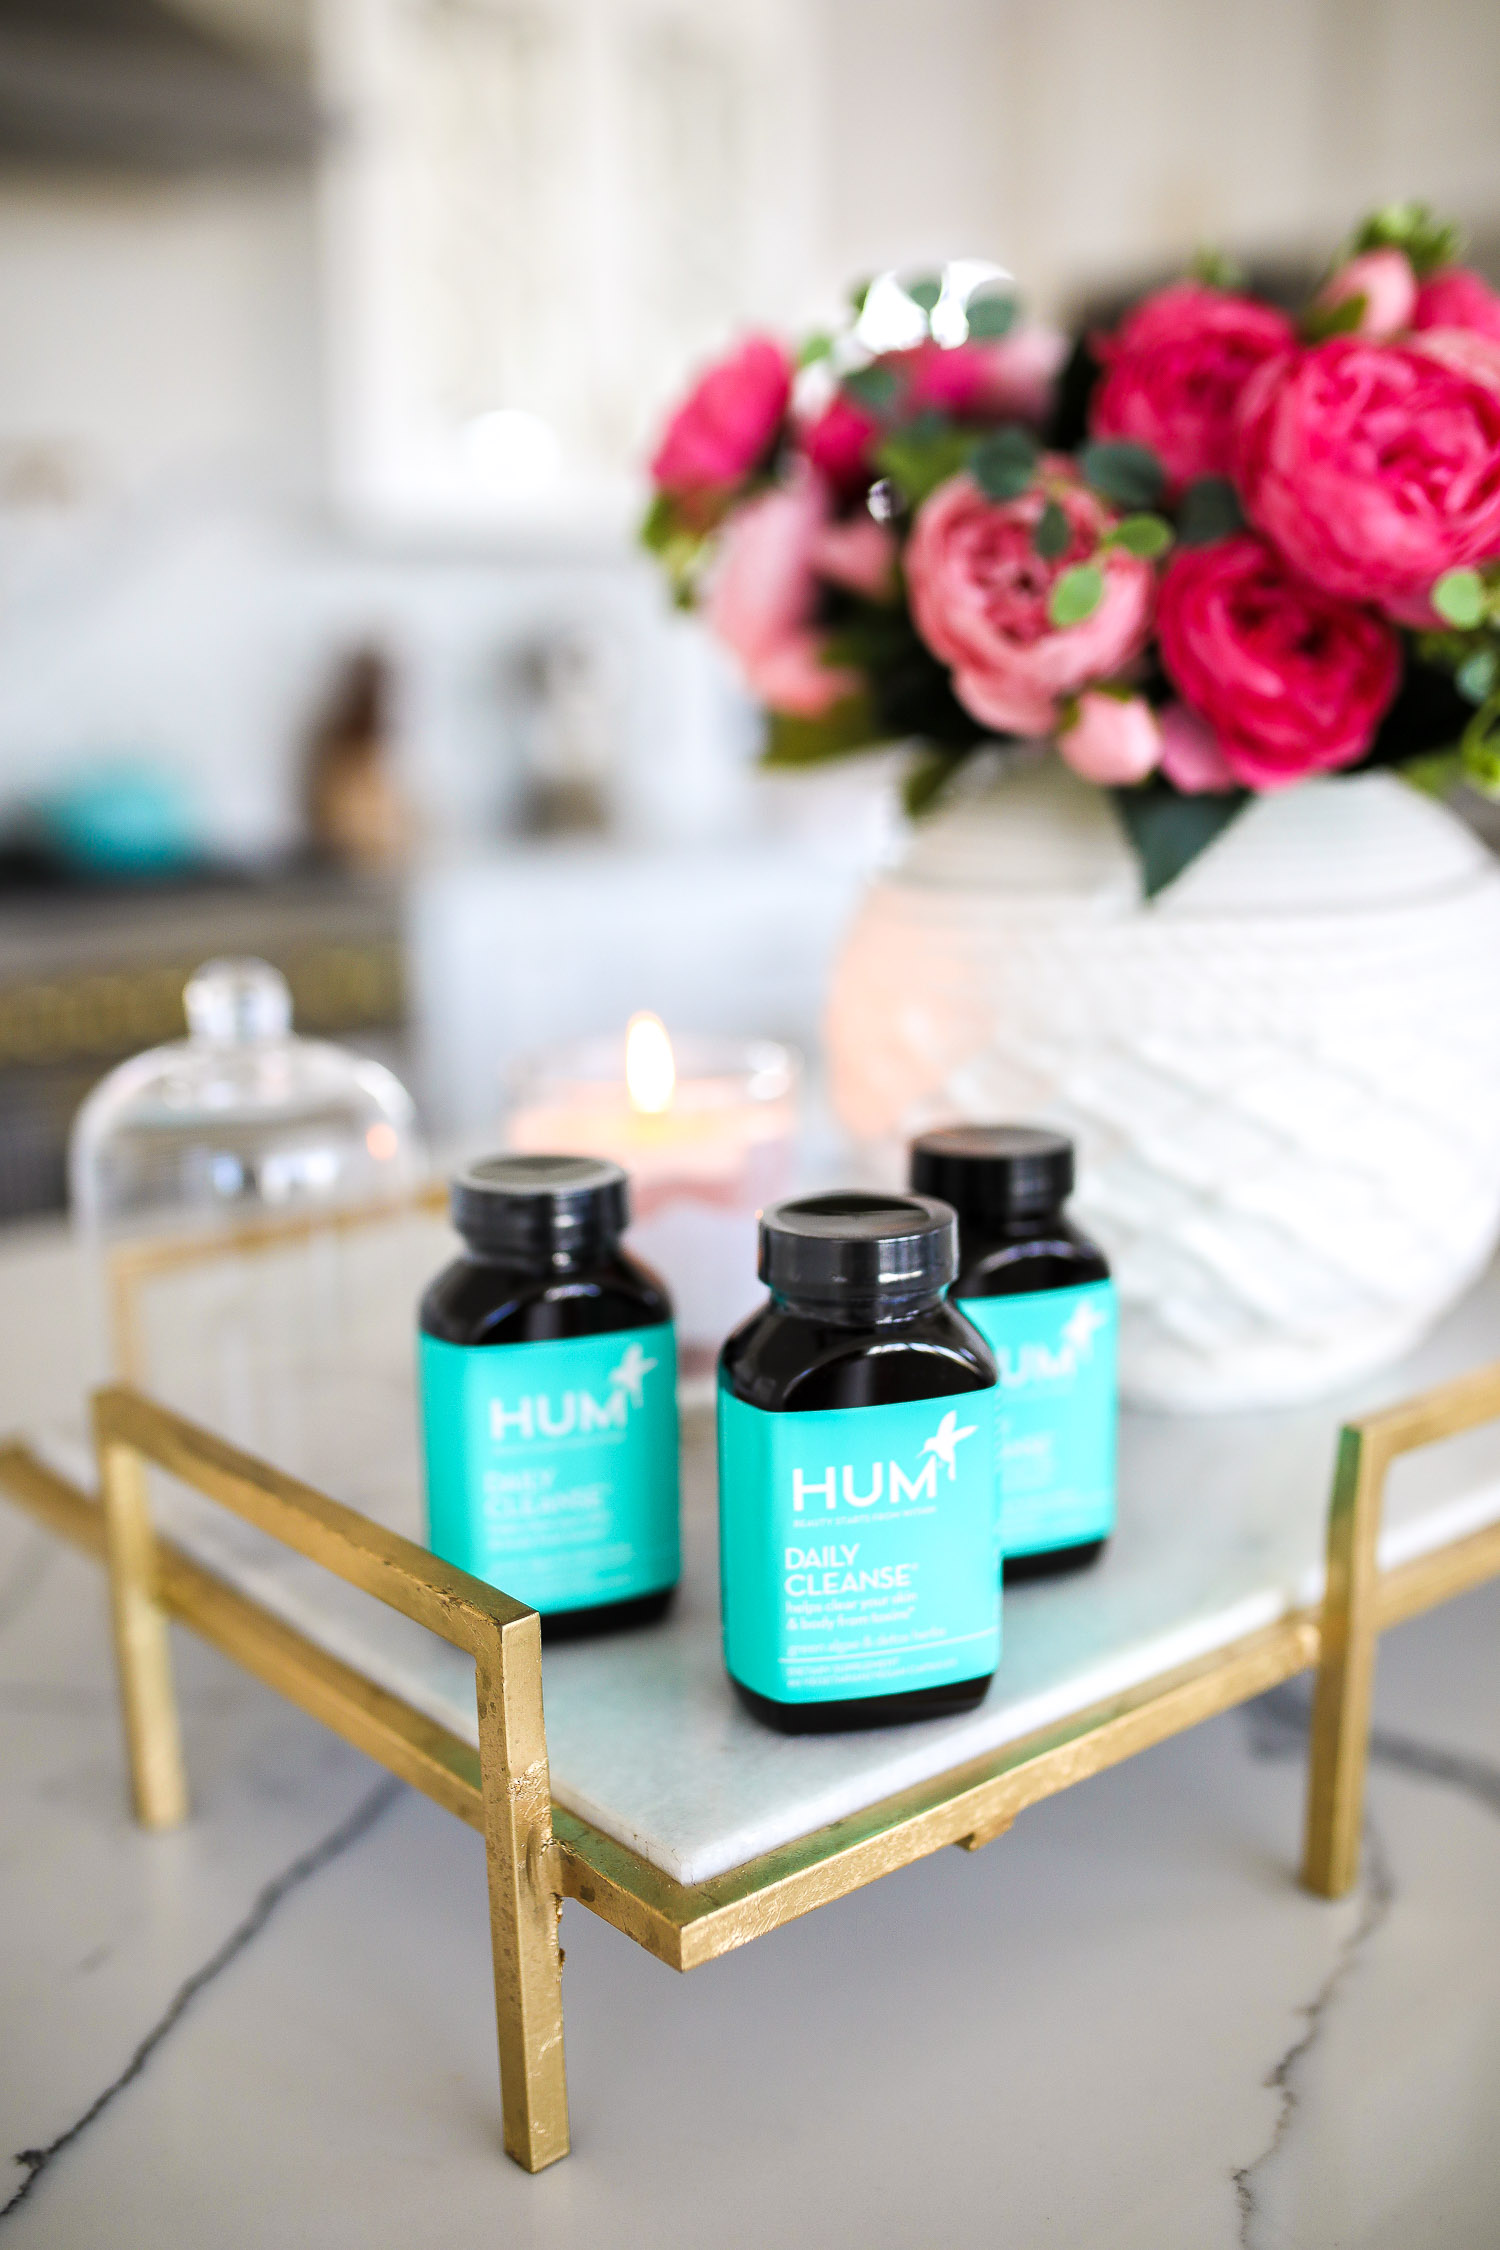 hum nutrition daily cleanse supplements, skin clearing vitamins, green algae vitamins, emily gemma skincare routine | Hum Daily Cleanse by popular US lifestyle blog, The Sweetest Thing: image of 3 bottle of Hum Daily Cleanse supplement bottles next to a white ceramic vase with pink roses in it. 